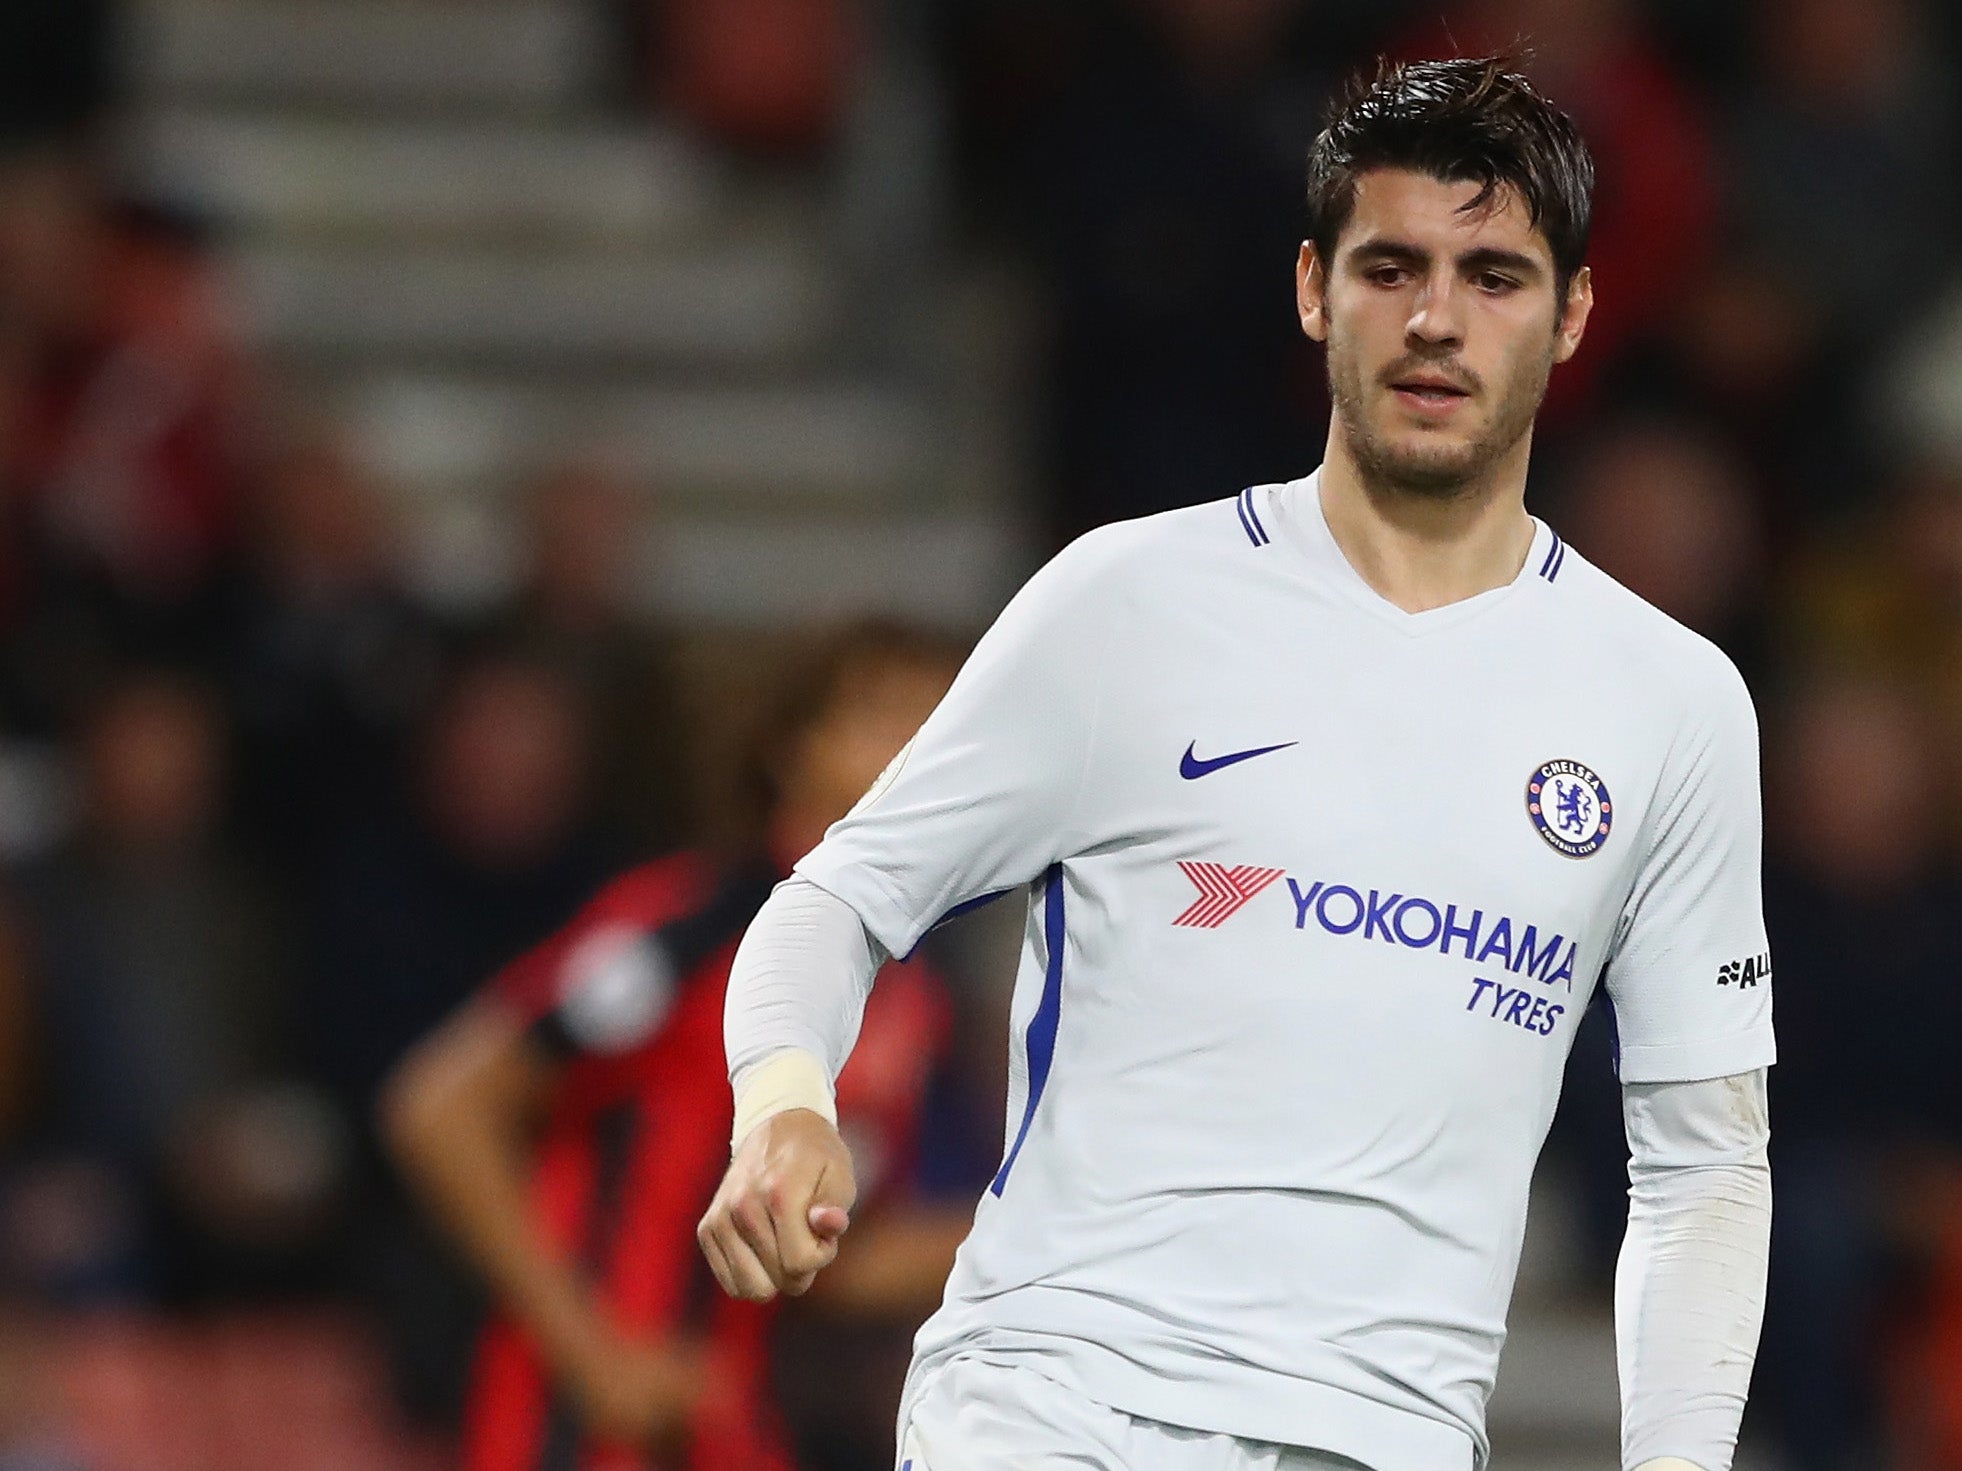 Morata was heavily linked with a move to Manchester United